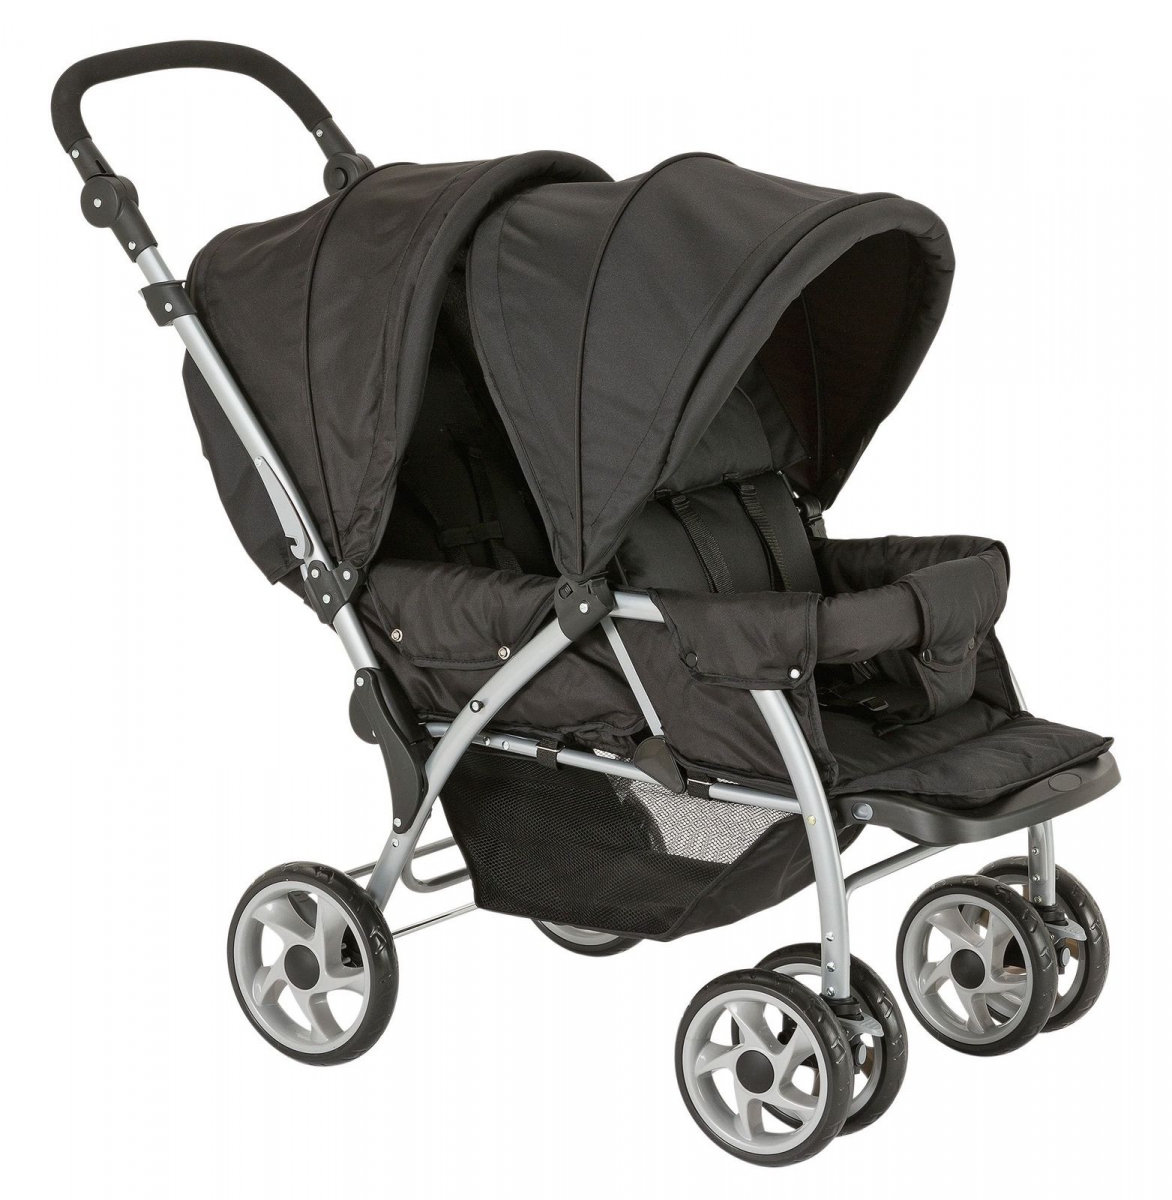 Double Trouble: Top Picks for Tandem and Side-by-Side Double Strollers